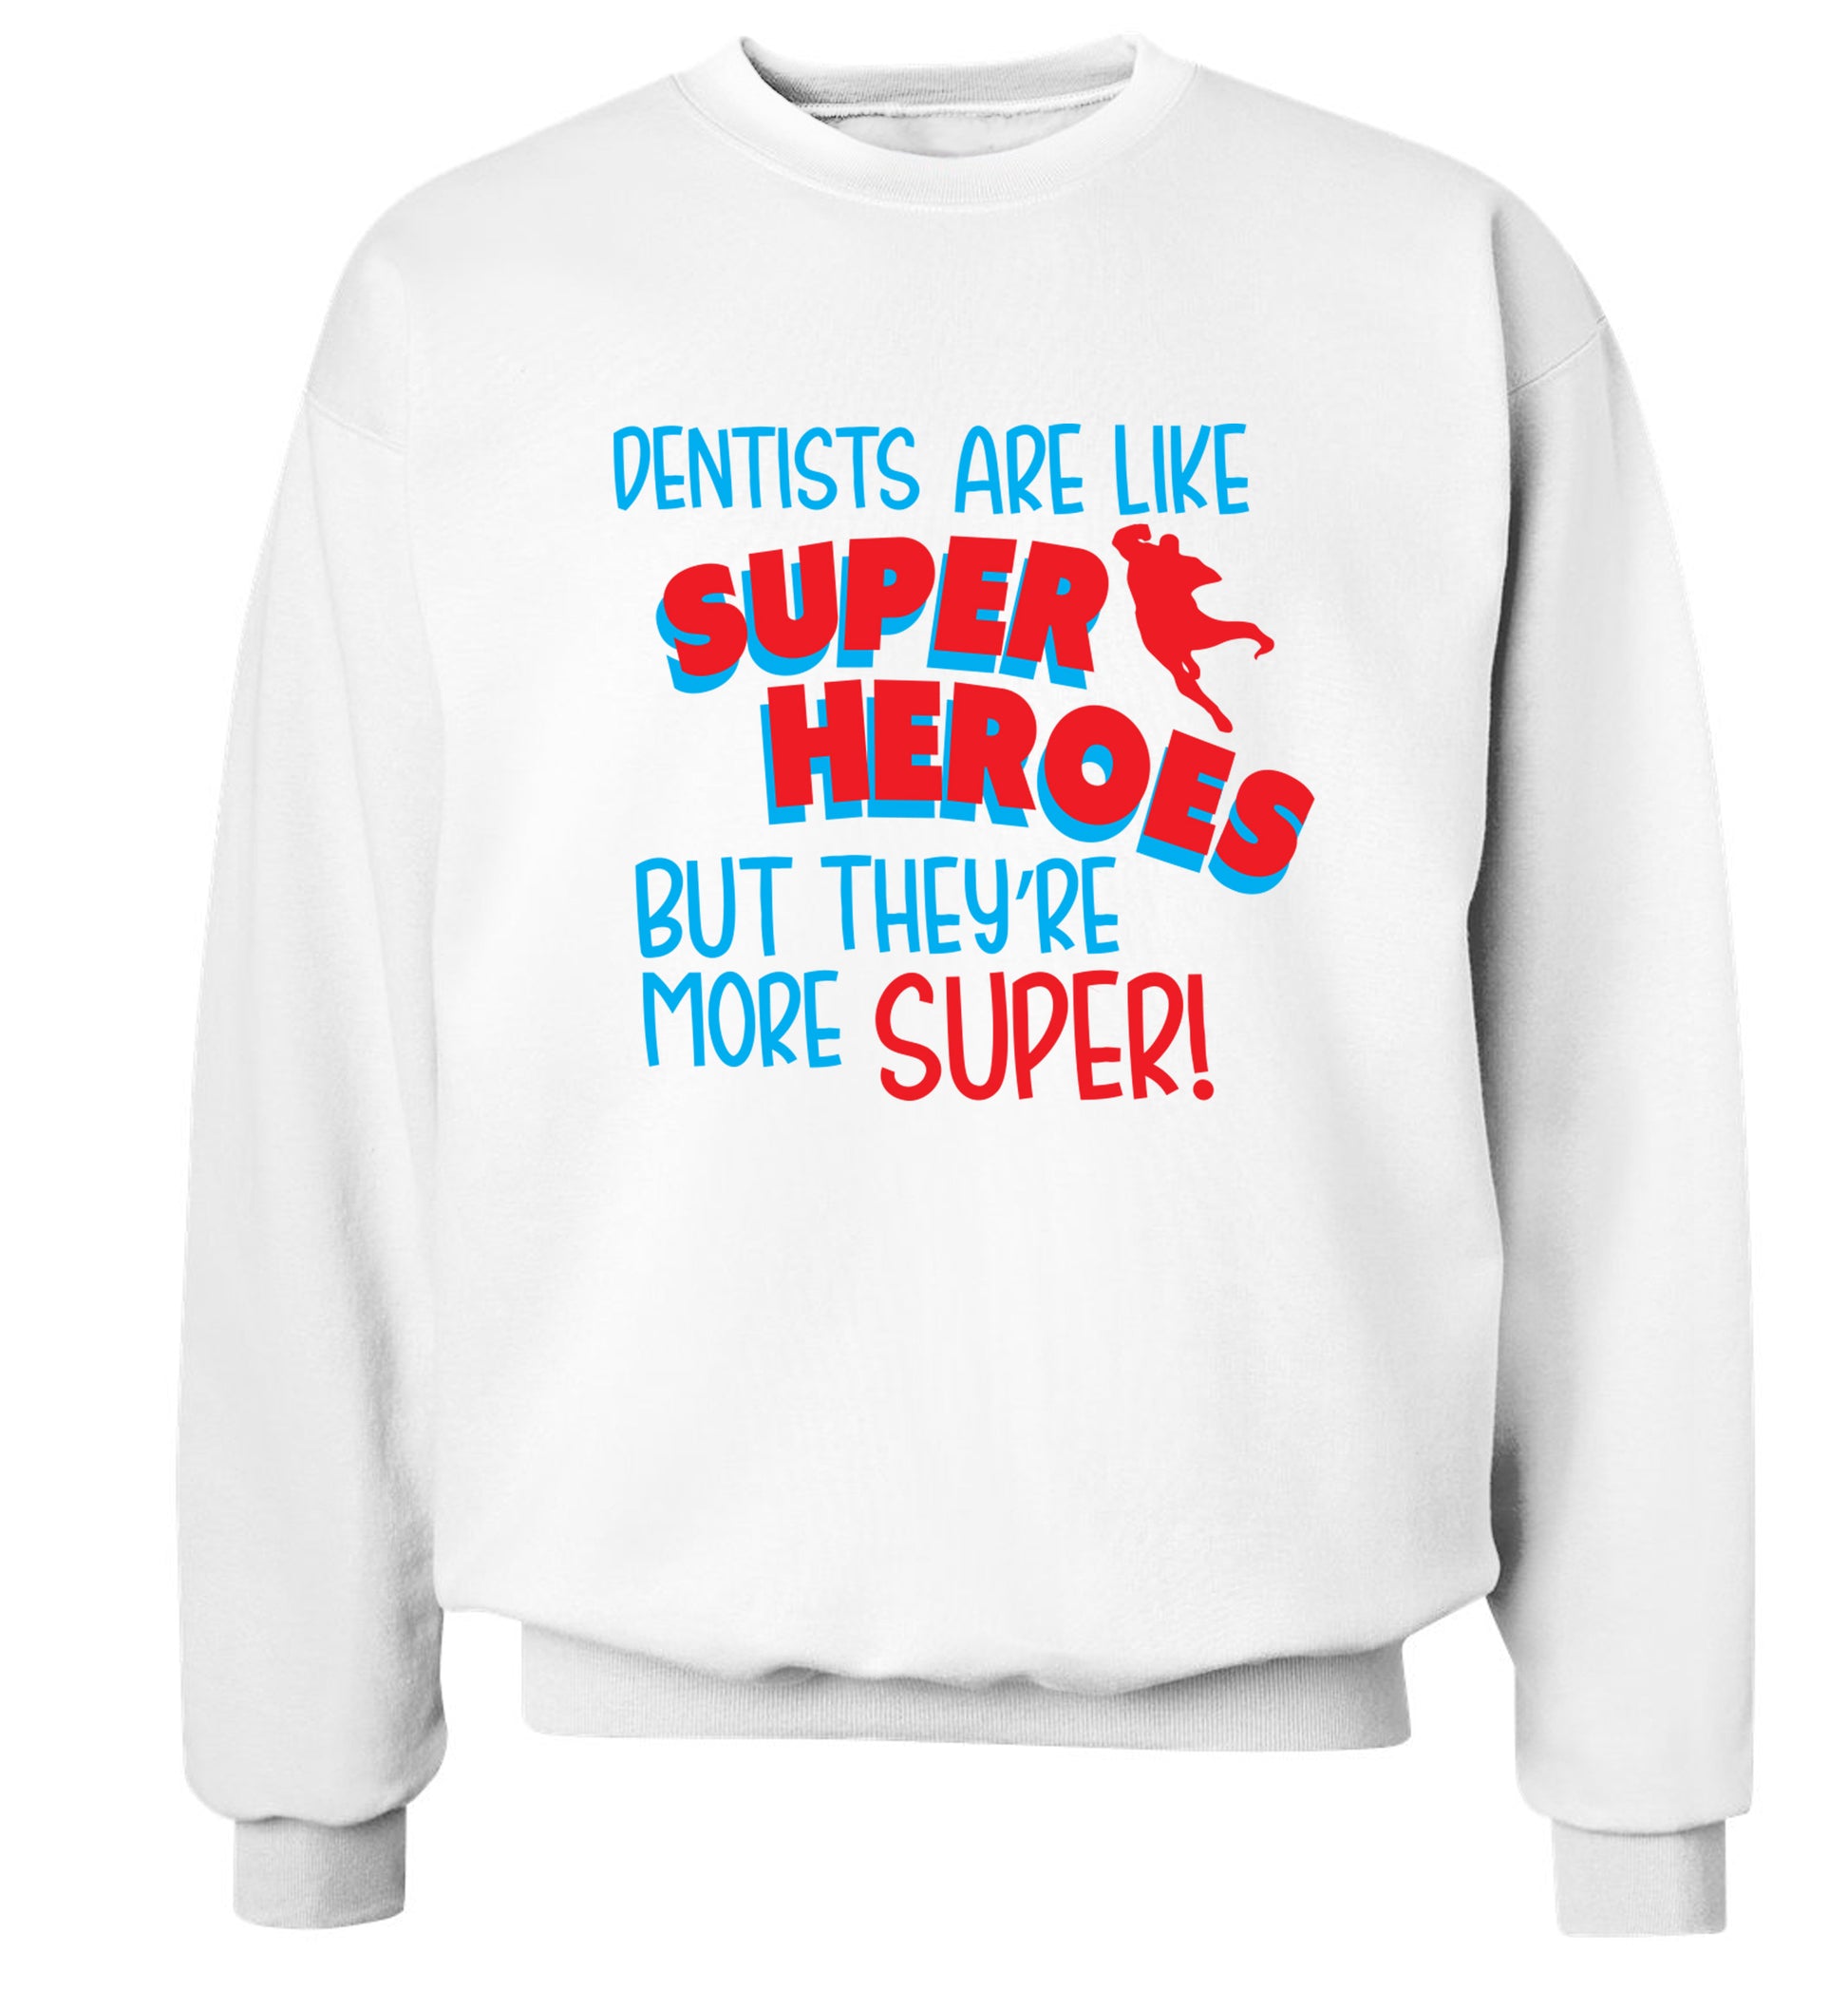 Dentists are like superheros but they're more super Adult's unisex white Sweater 2XL